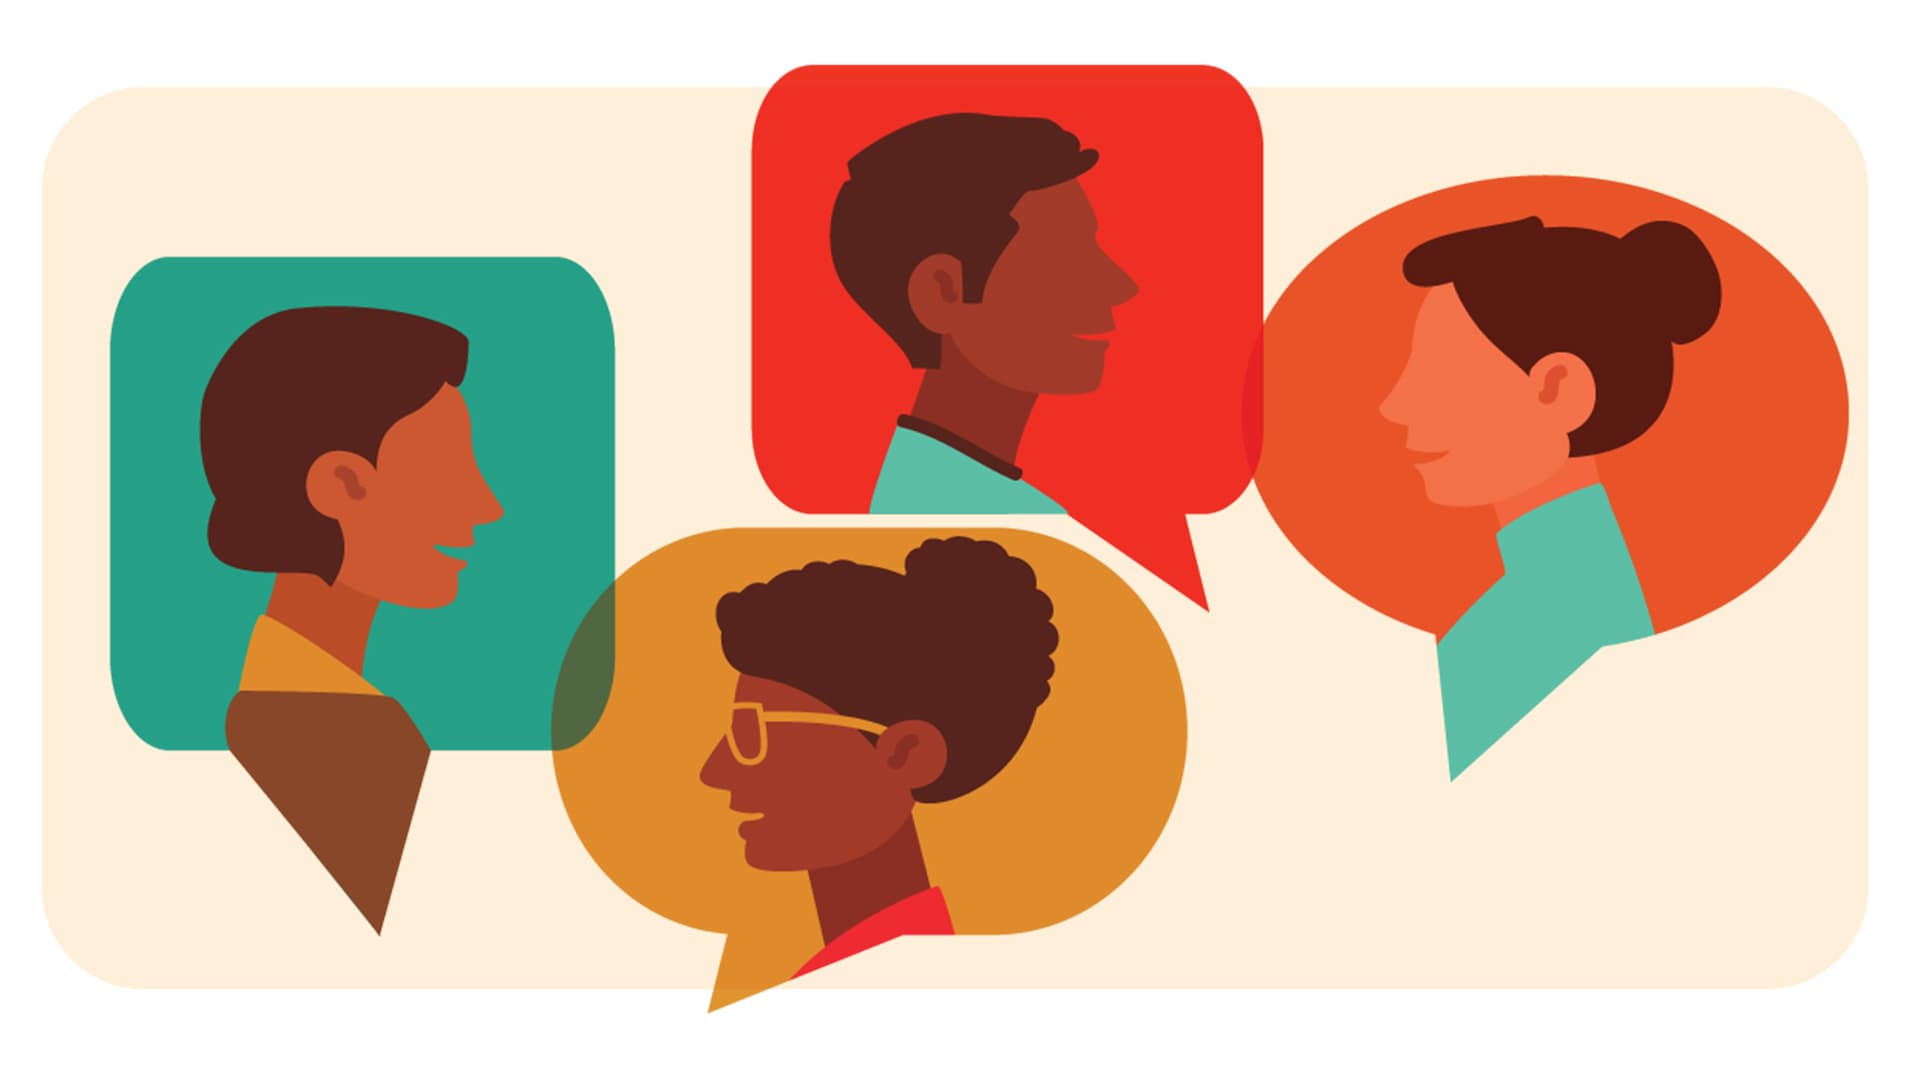 Illustration of four people in speech bubbles